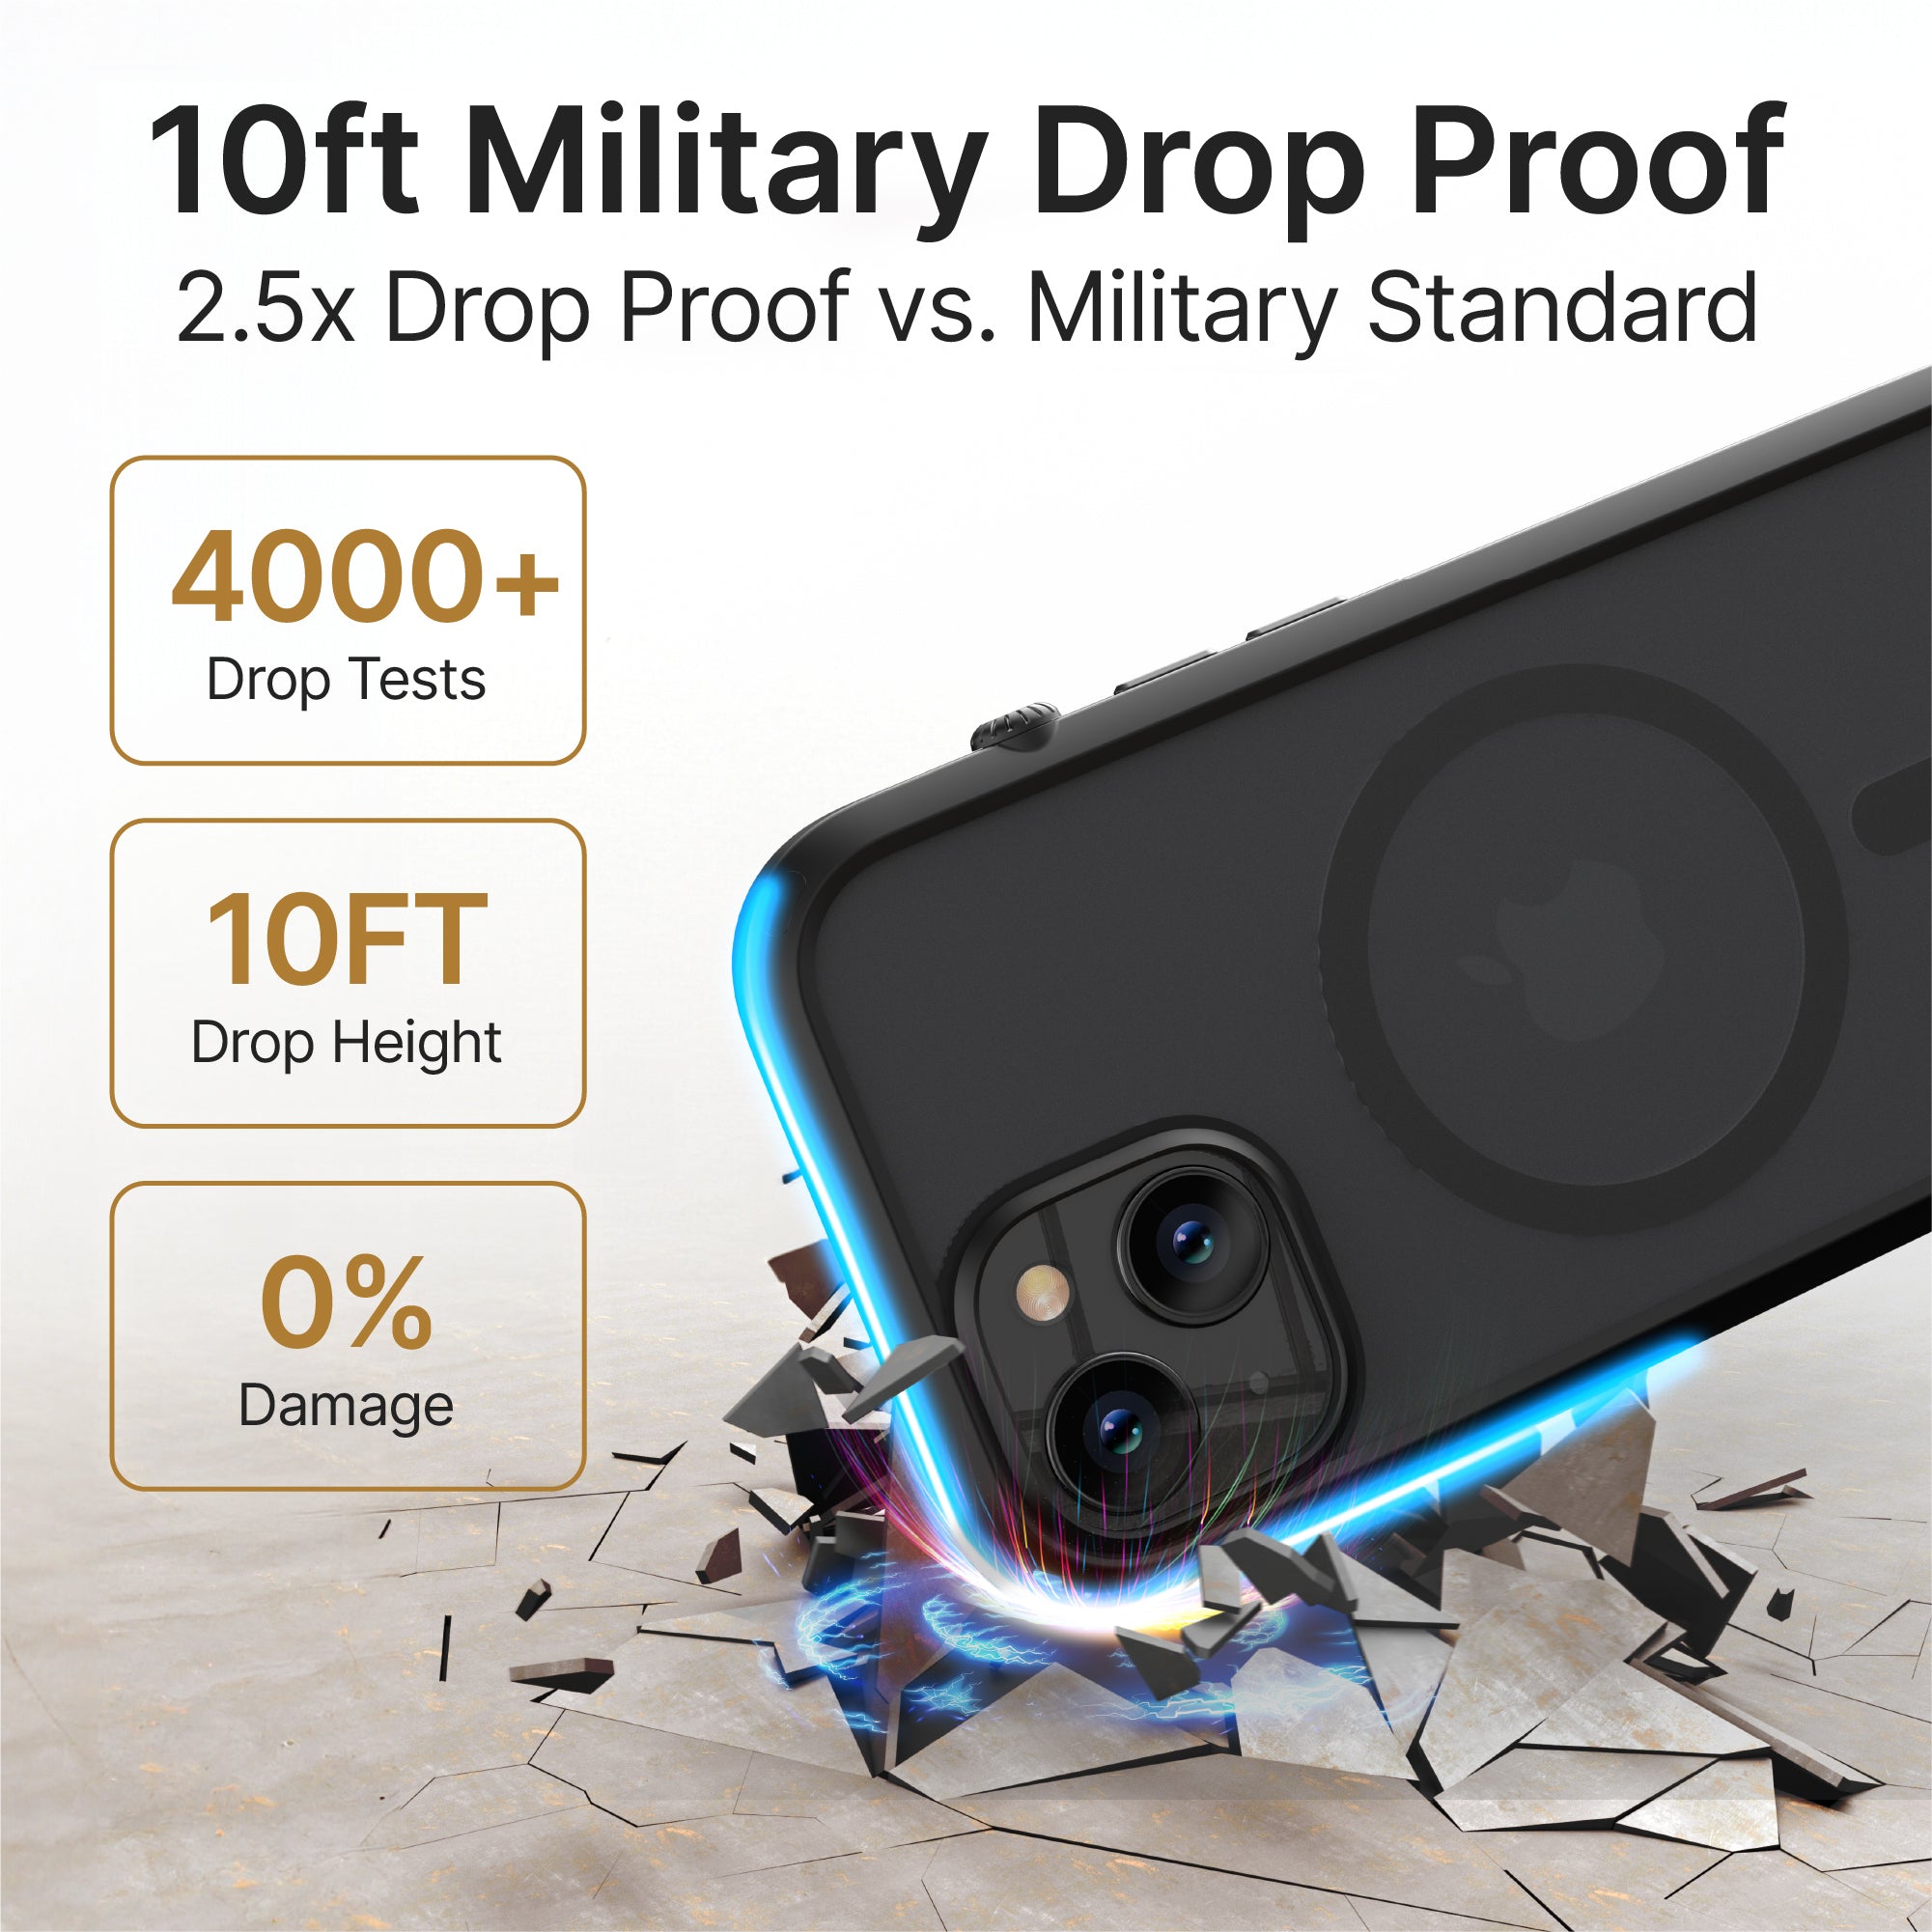 catalyst iphone 15 series influence case magsafe compatible stealth black for iphone 15 with cracked floor text reads 10ft military drop proof 2.5x drop proof vs military standard 4000+ drop tests 10ft drop height 0% damage